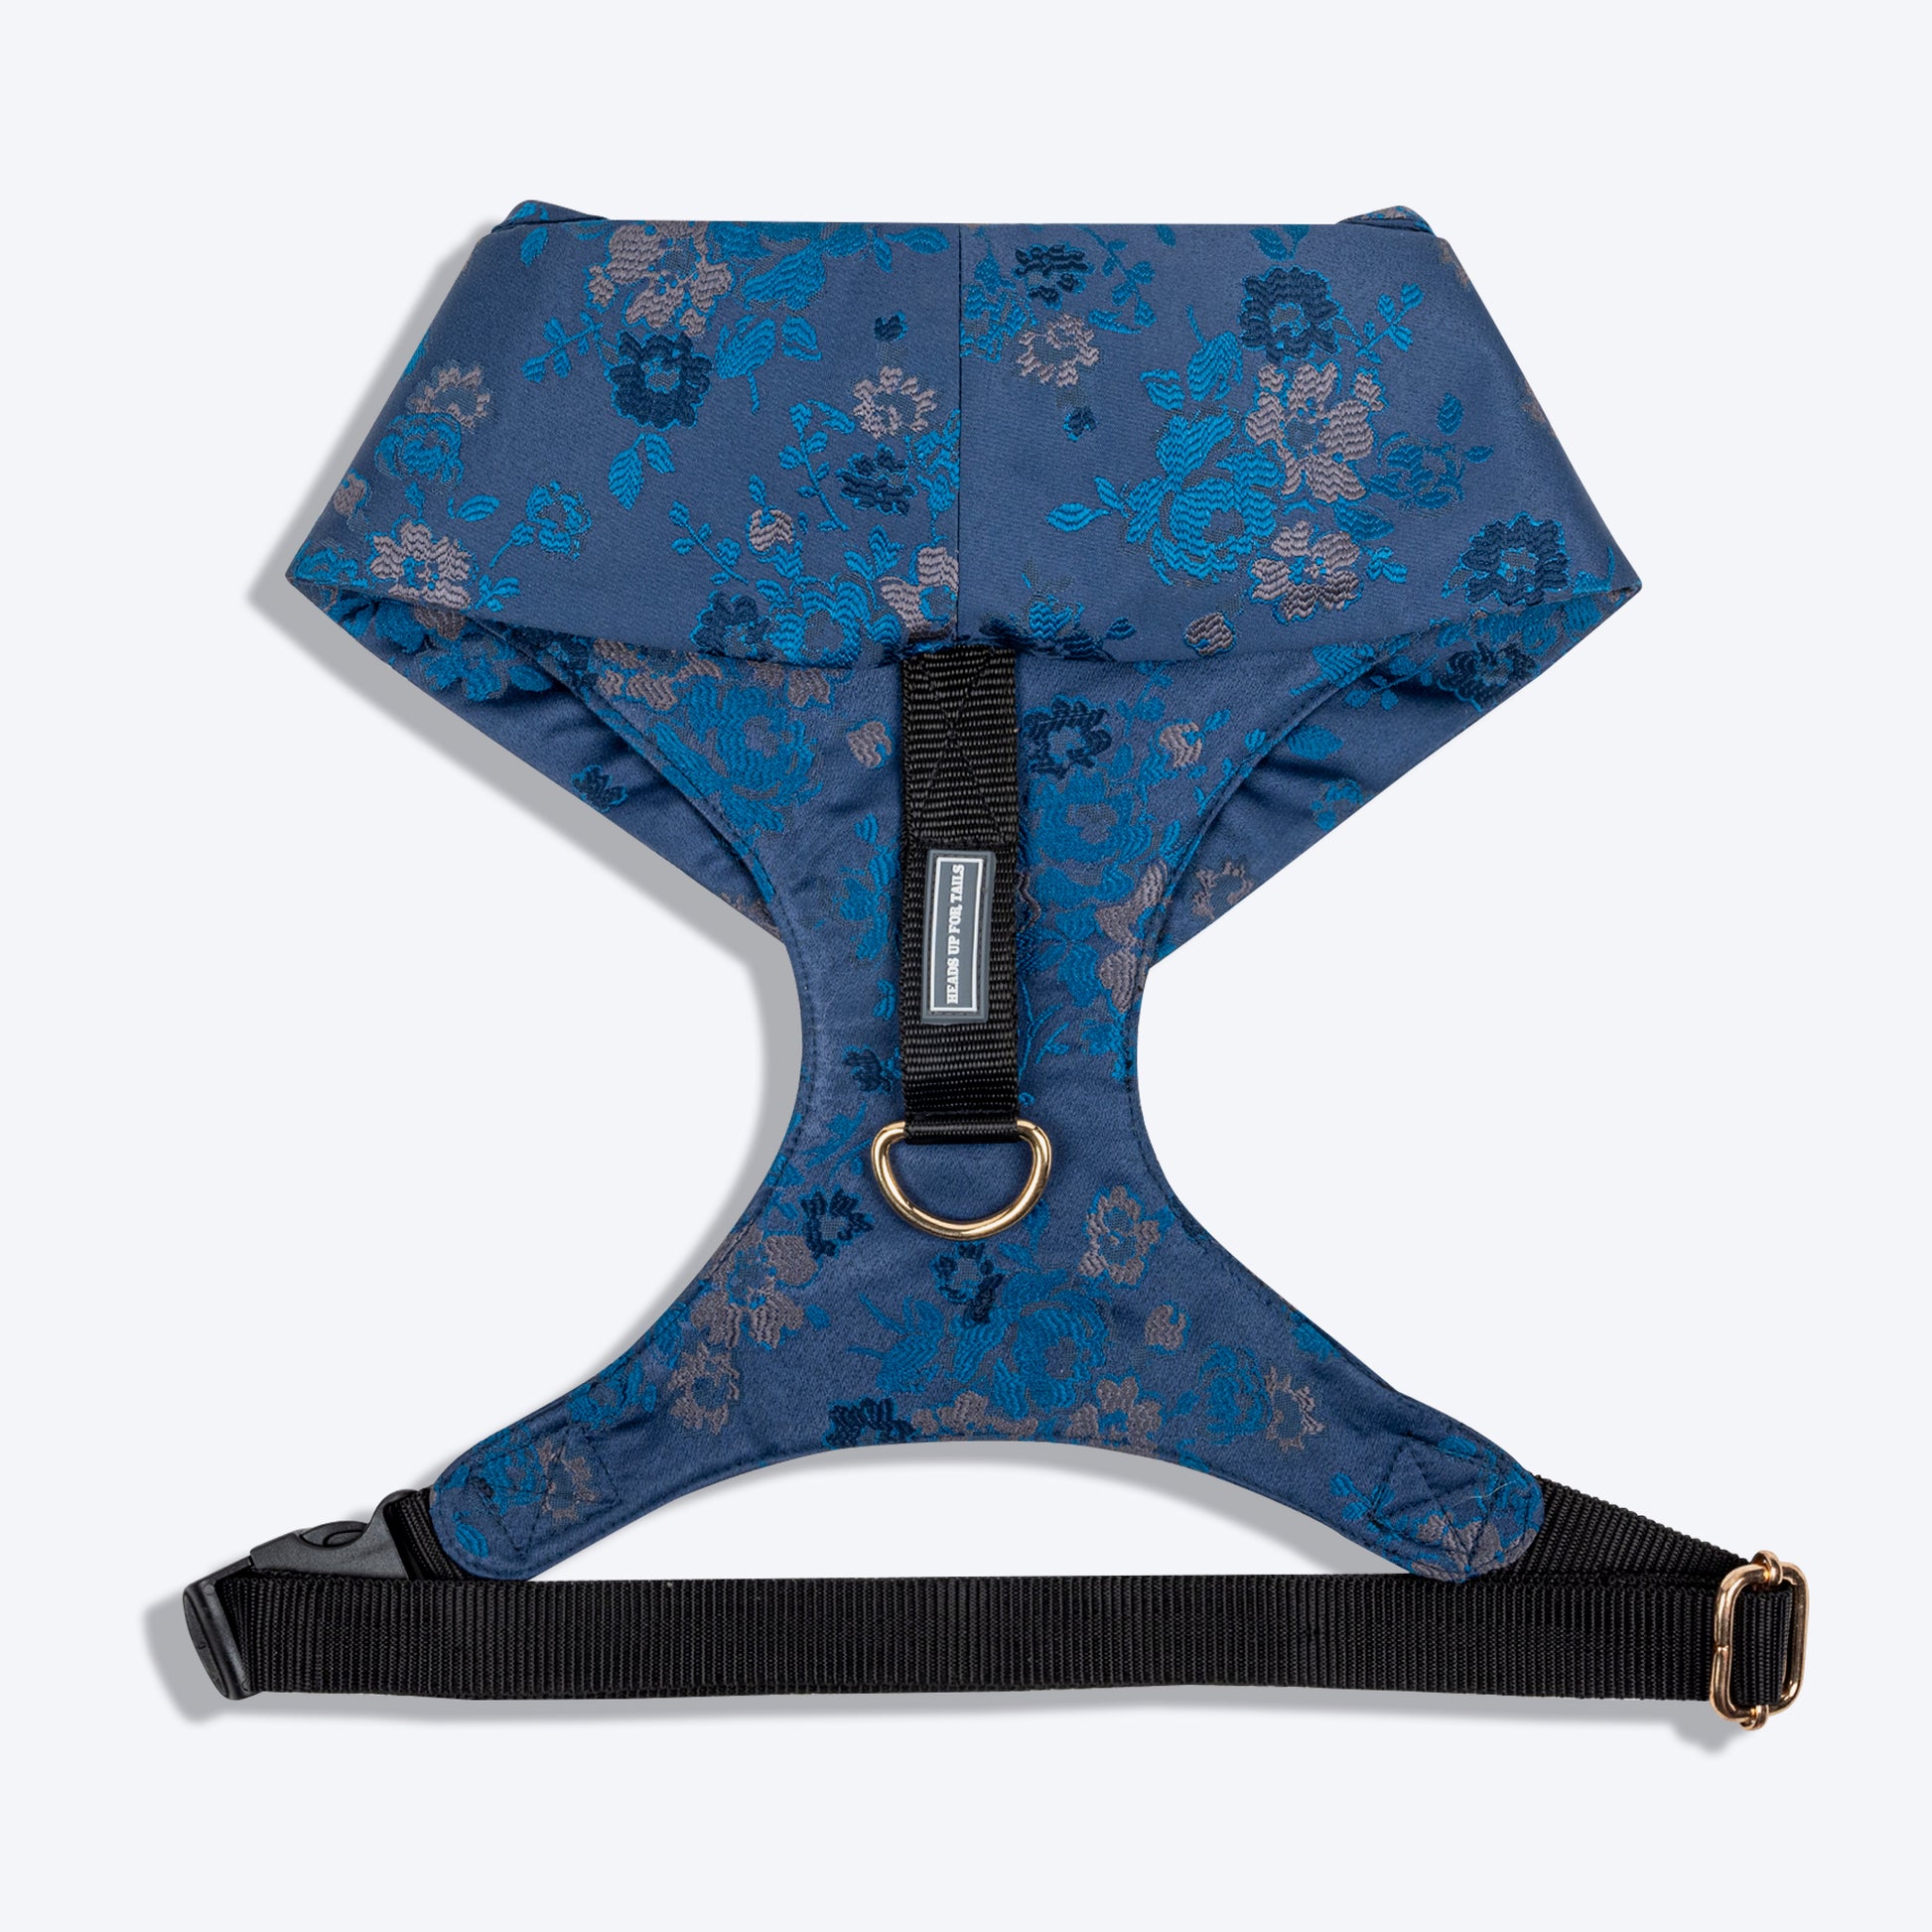 HUFT Made To Order Festive Tuxedo Dog Harness - Heads Up For Tails